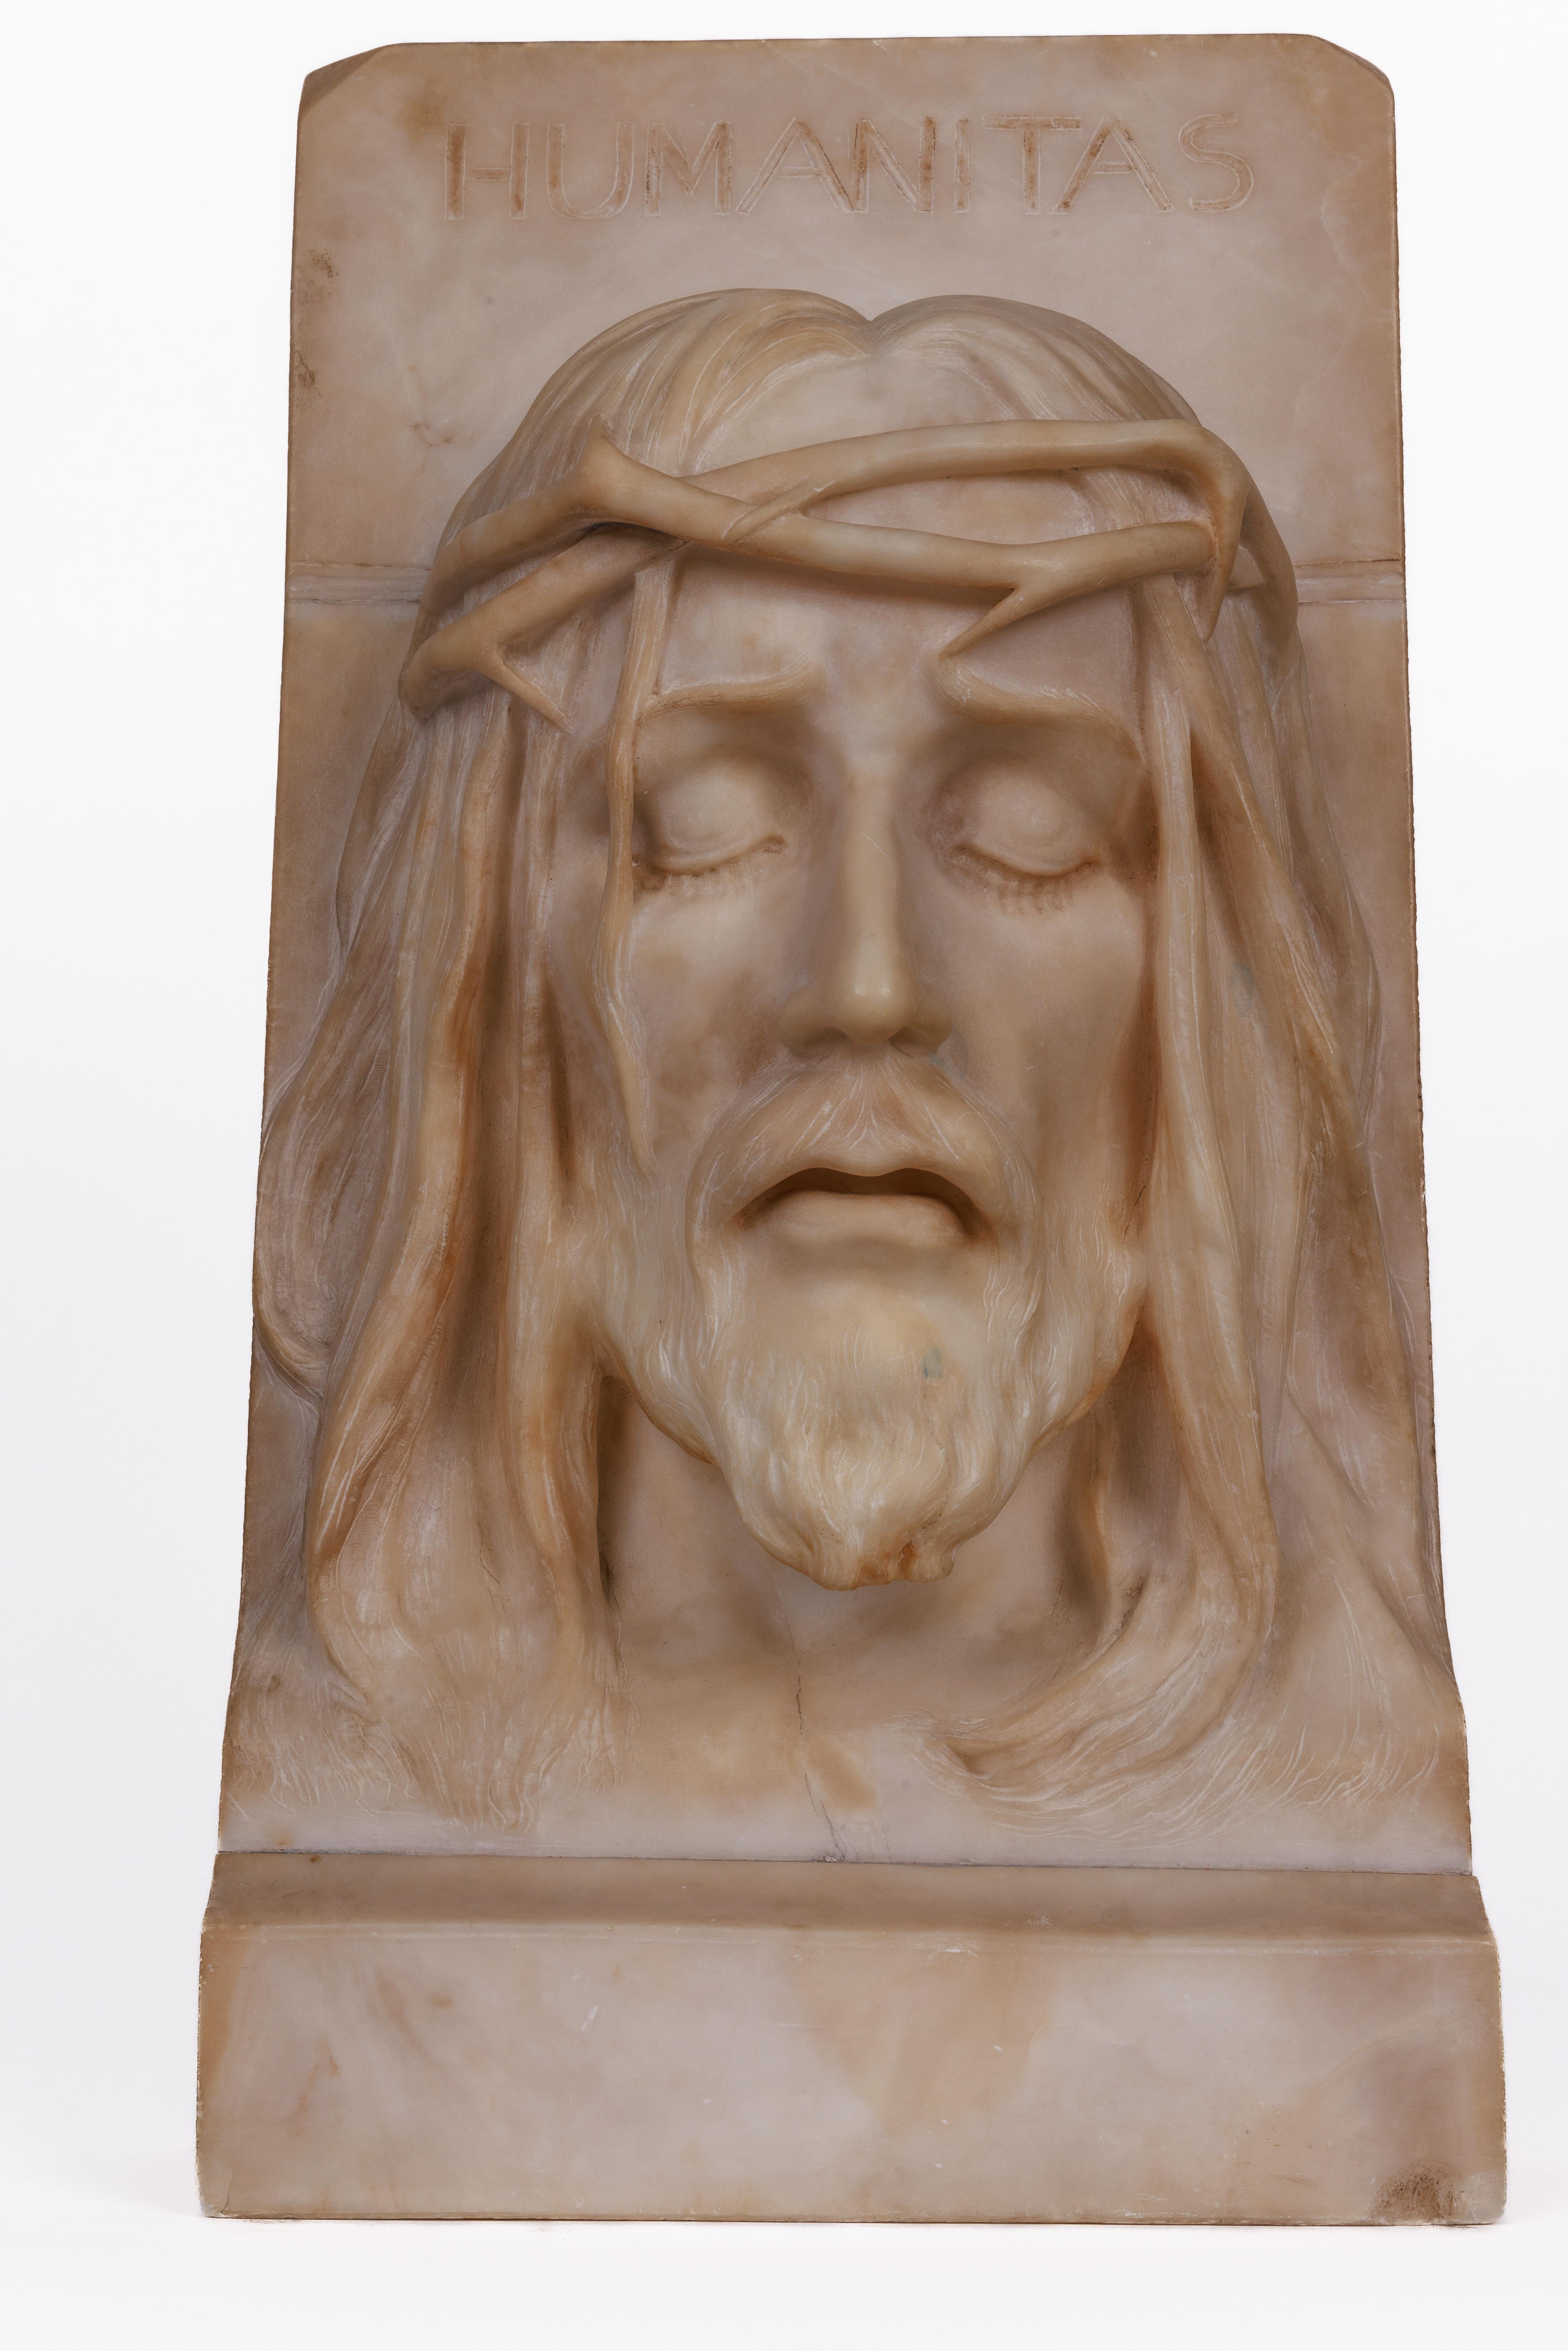 Rare and Important Italian Alabaster Bust Sculpture of Jesus Christ, C. 1860 - Brown Figurative Sculpture by Unknown